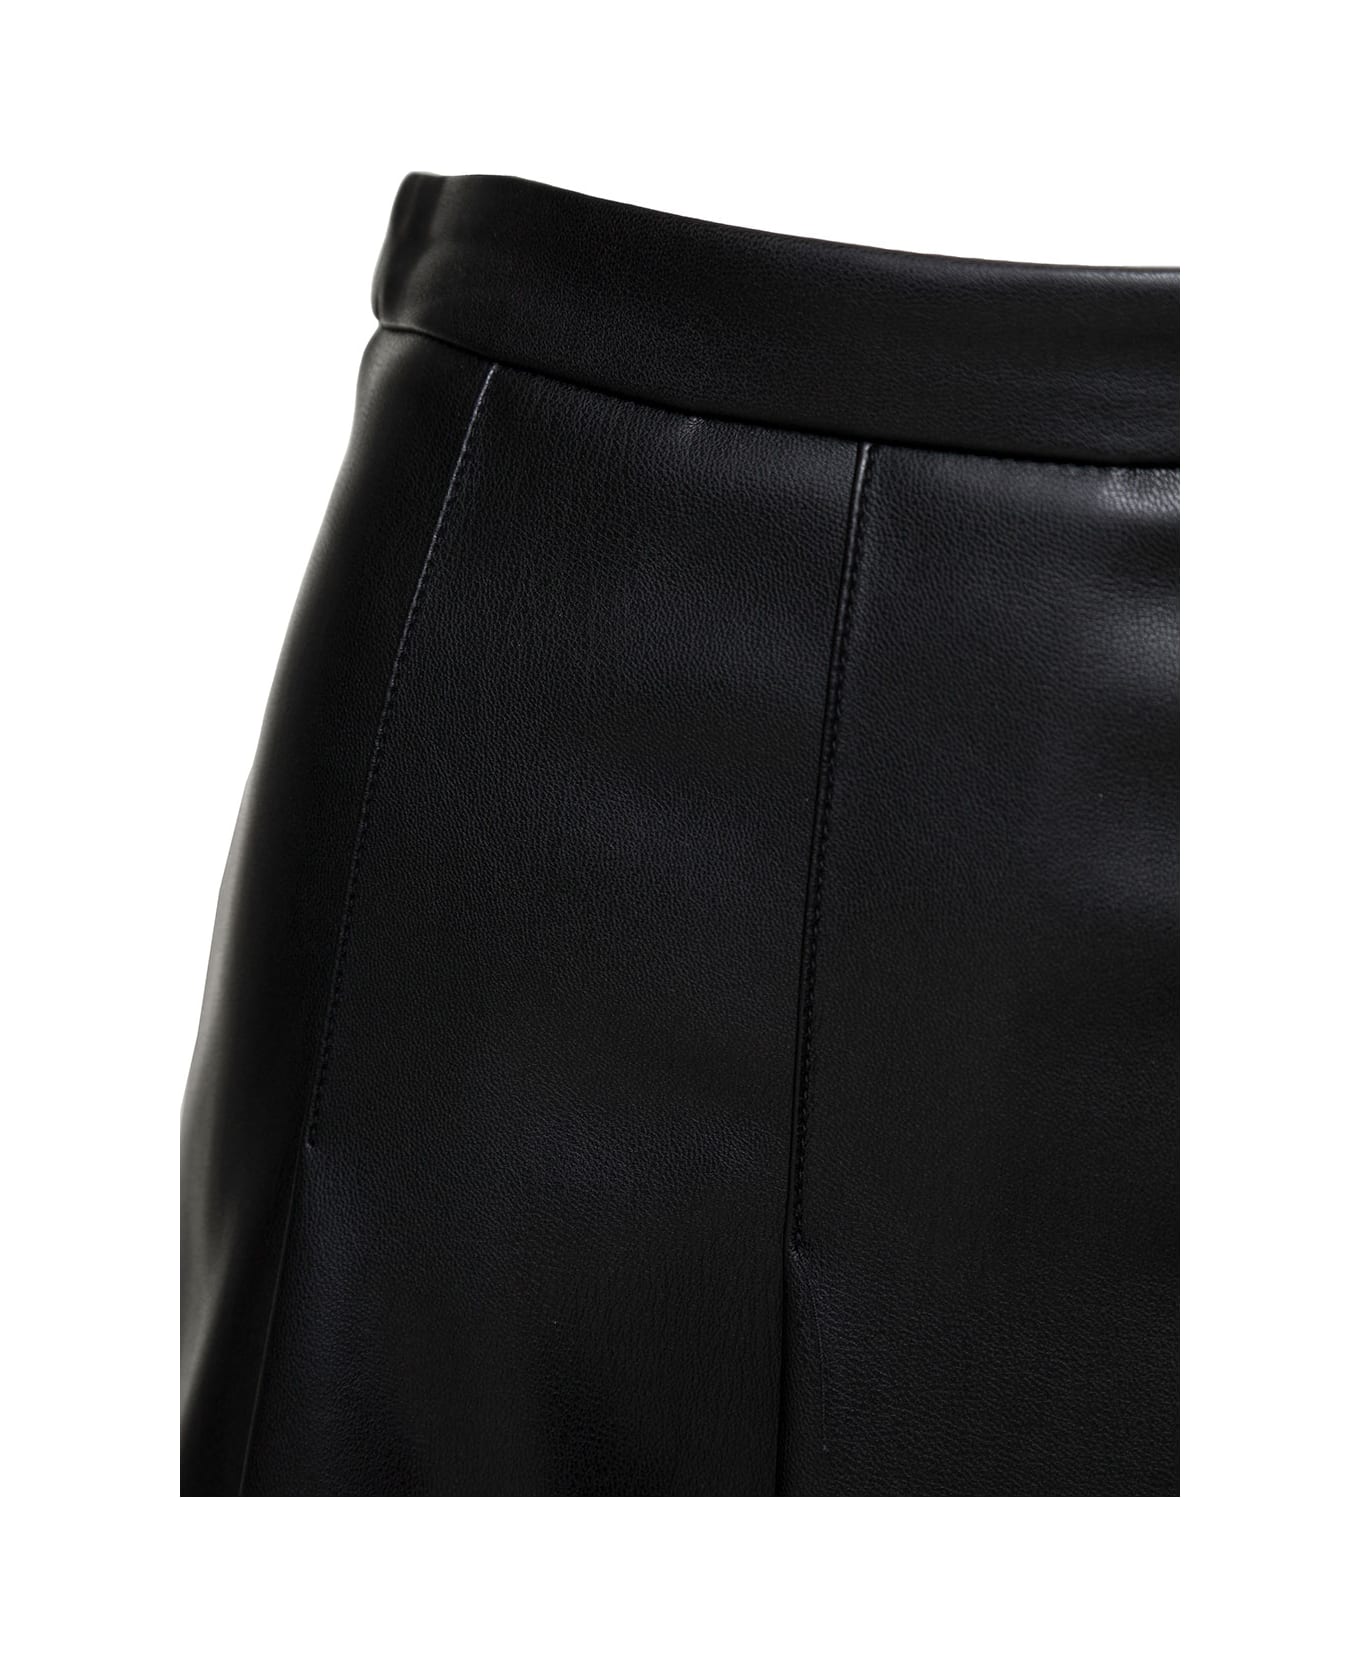 SEMICOUTURE Black Pleated Mini-skirt In Eco Leather Woman - Black